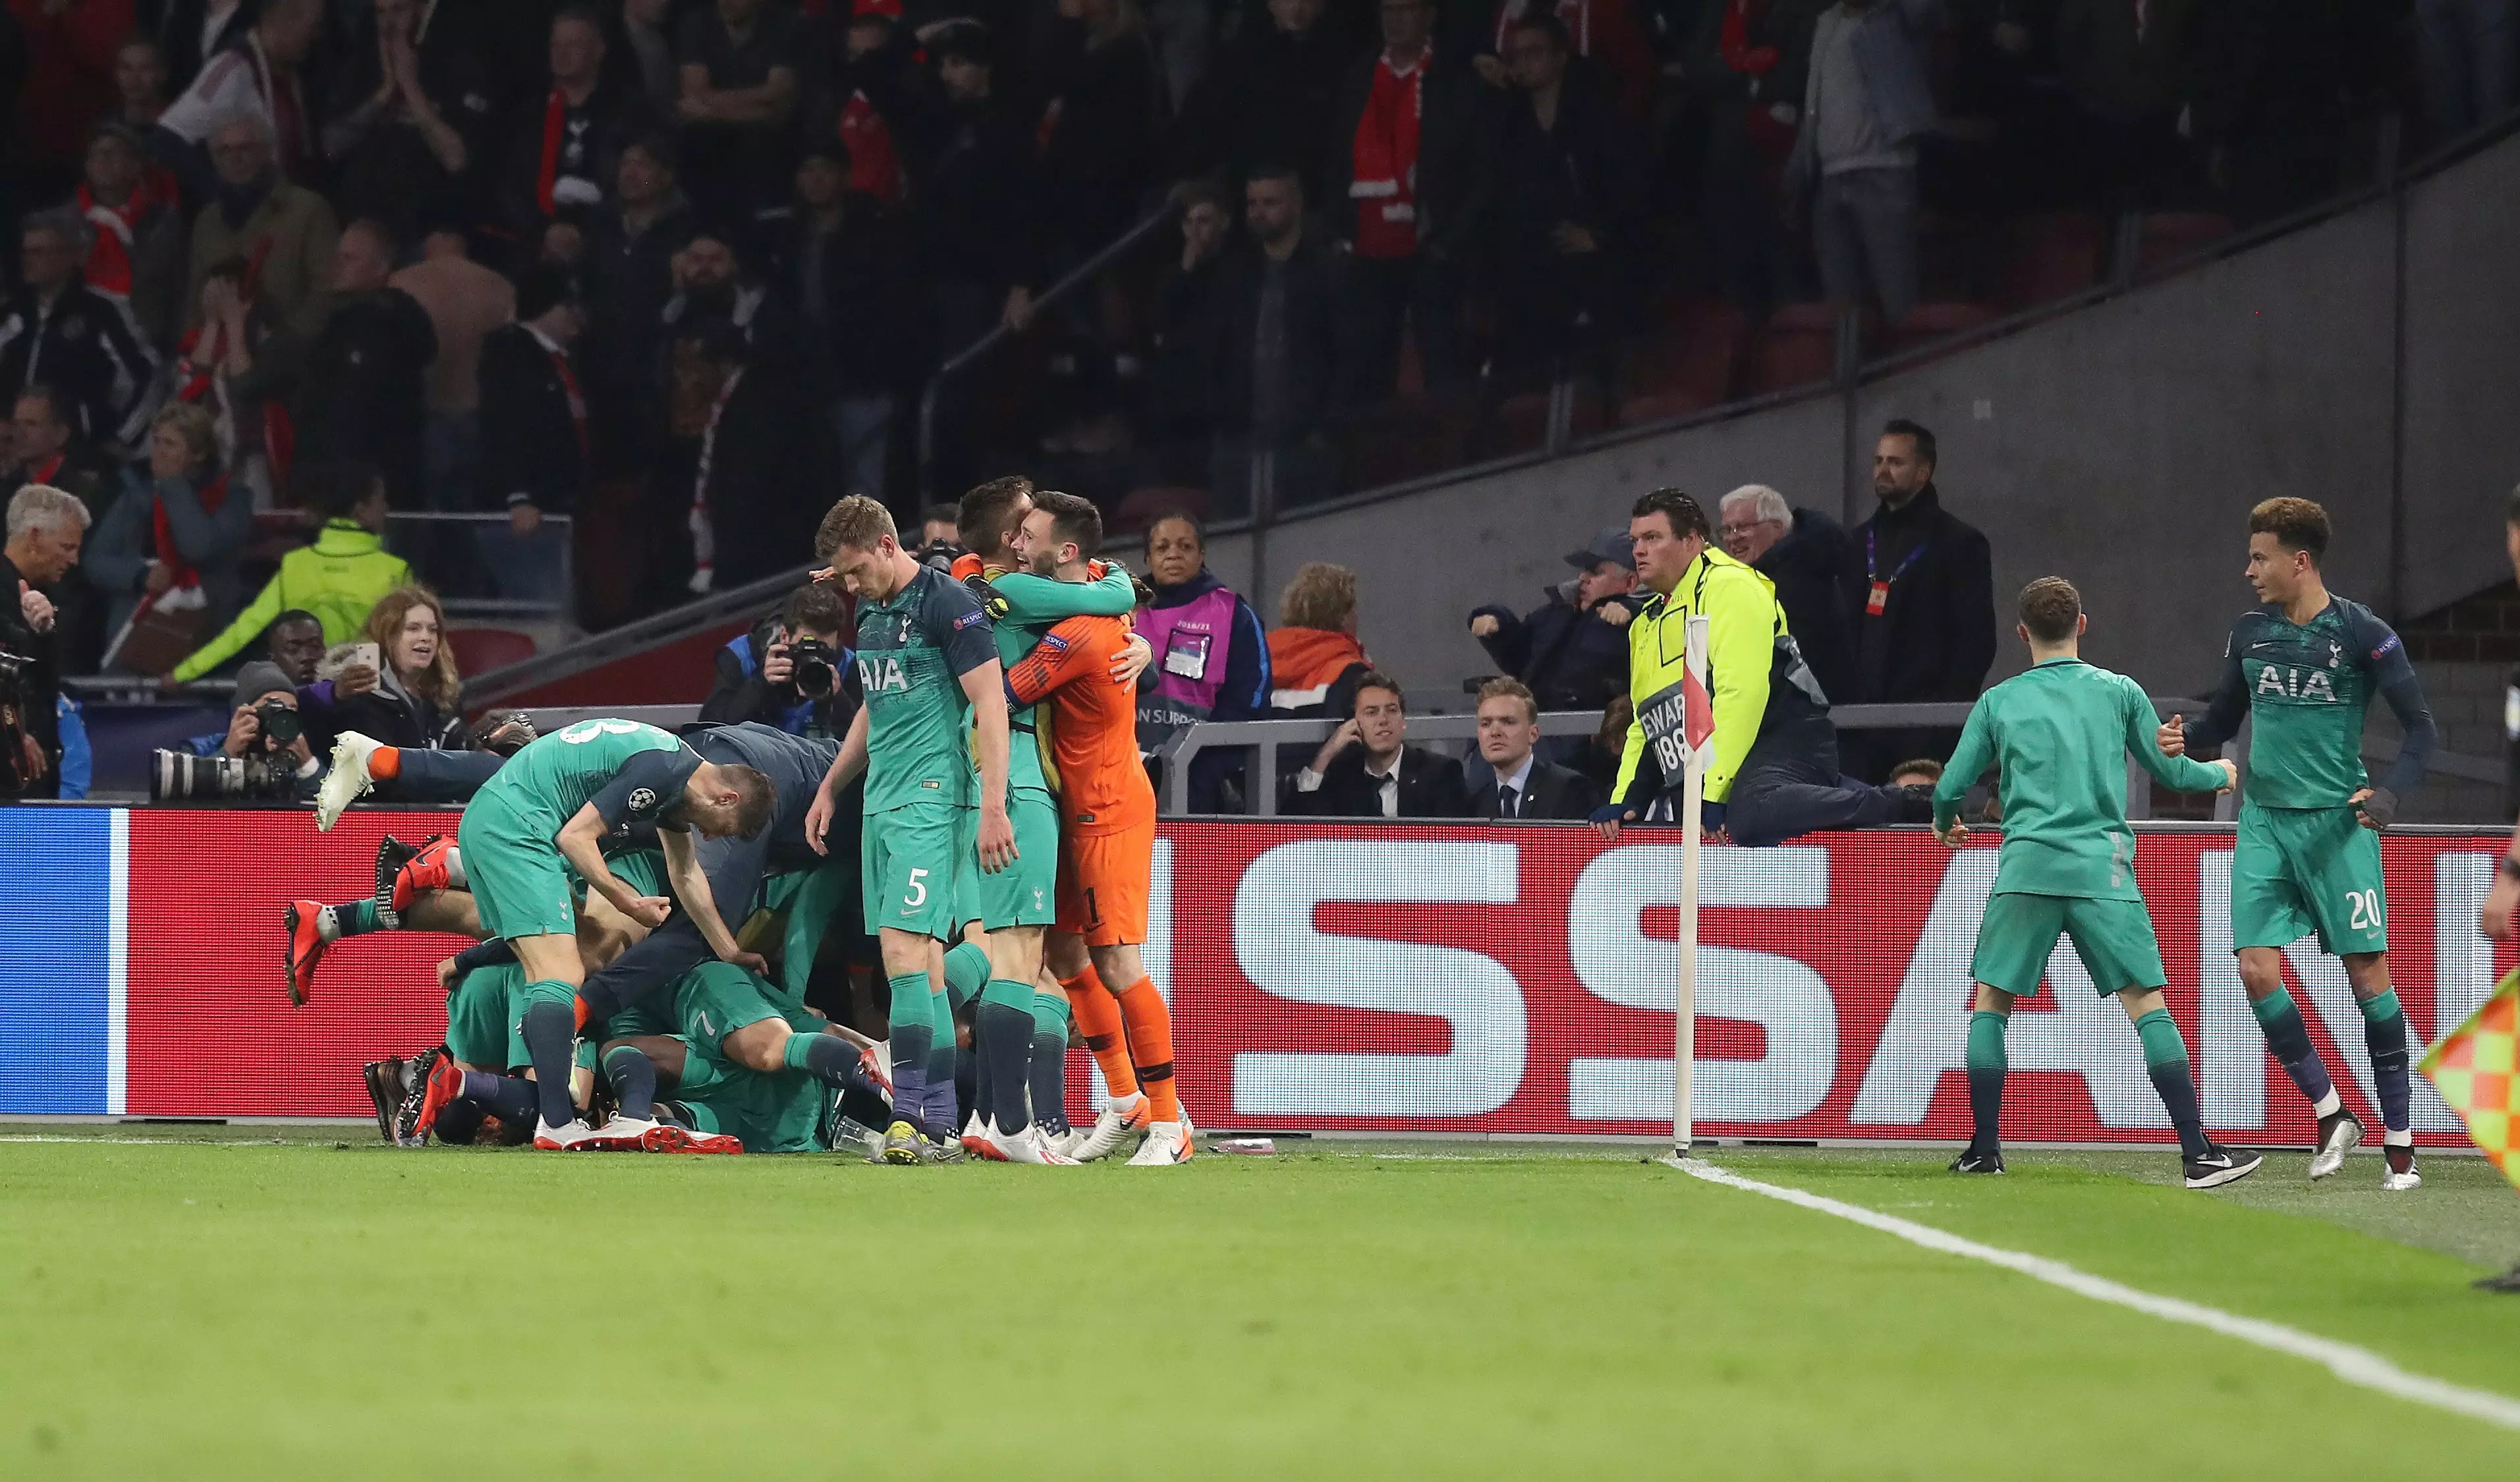 Spurs celebrate their incredible comeback against Ajax to make it to the final. Image: PA Images